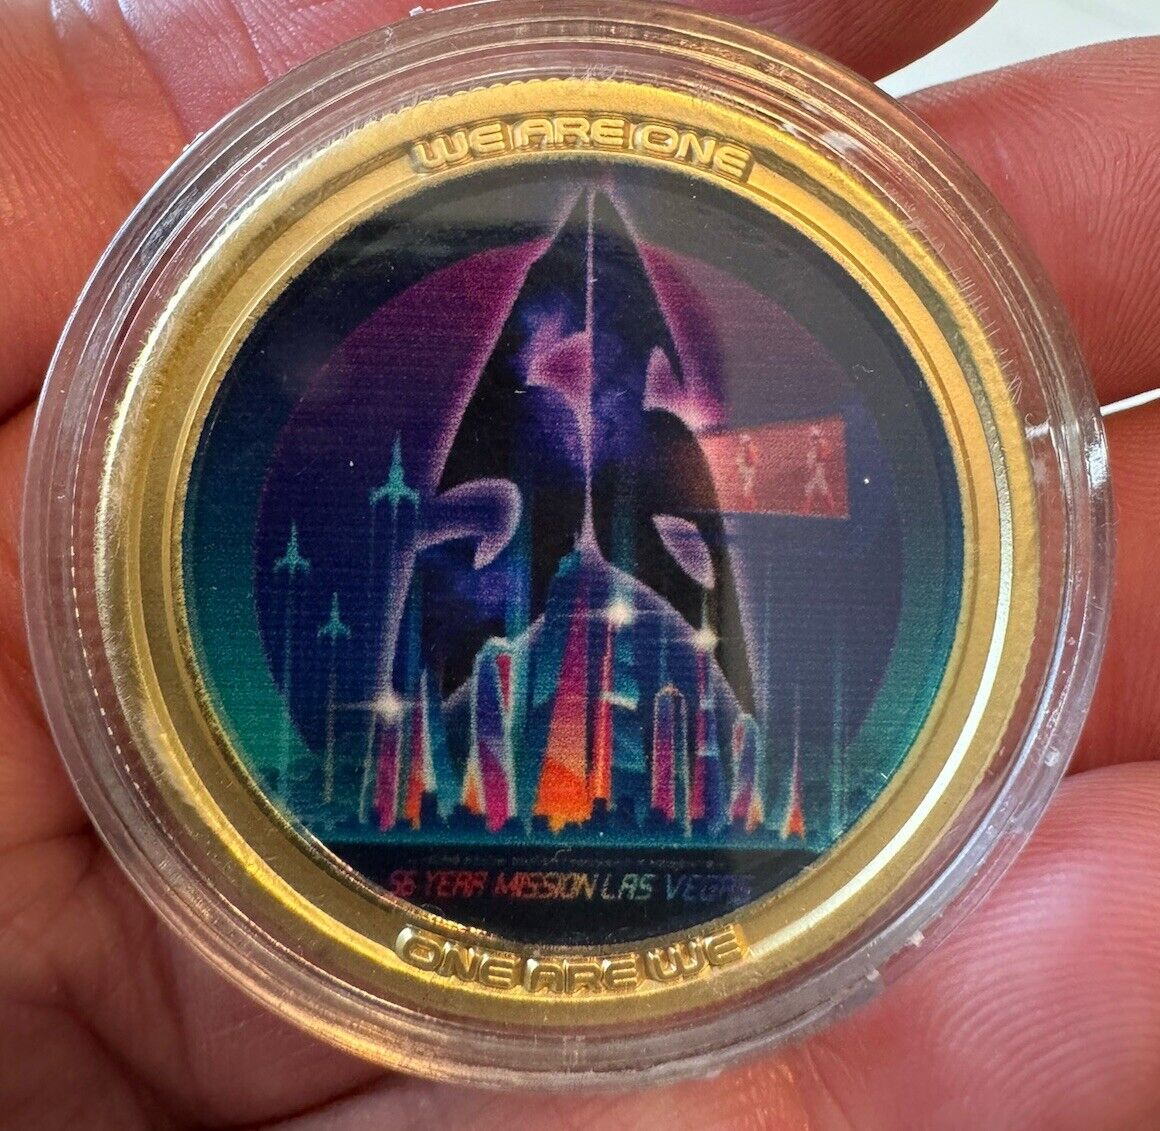 2022 Star Trek Convention Las Vegas Nevada 56th  Challenge Coin We Are One